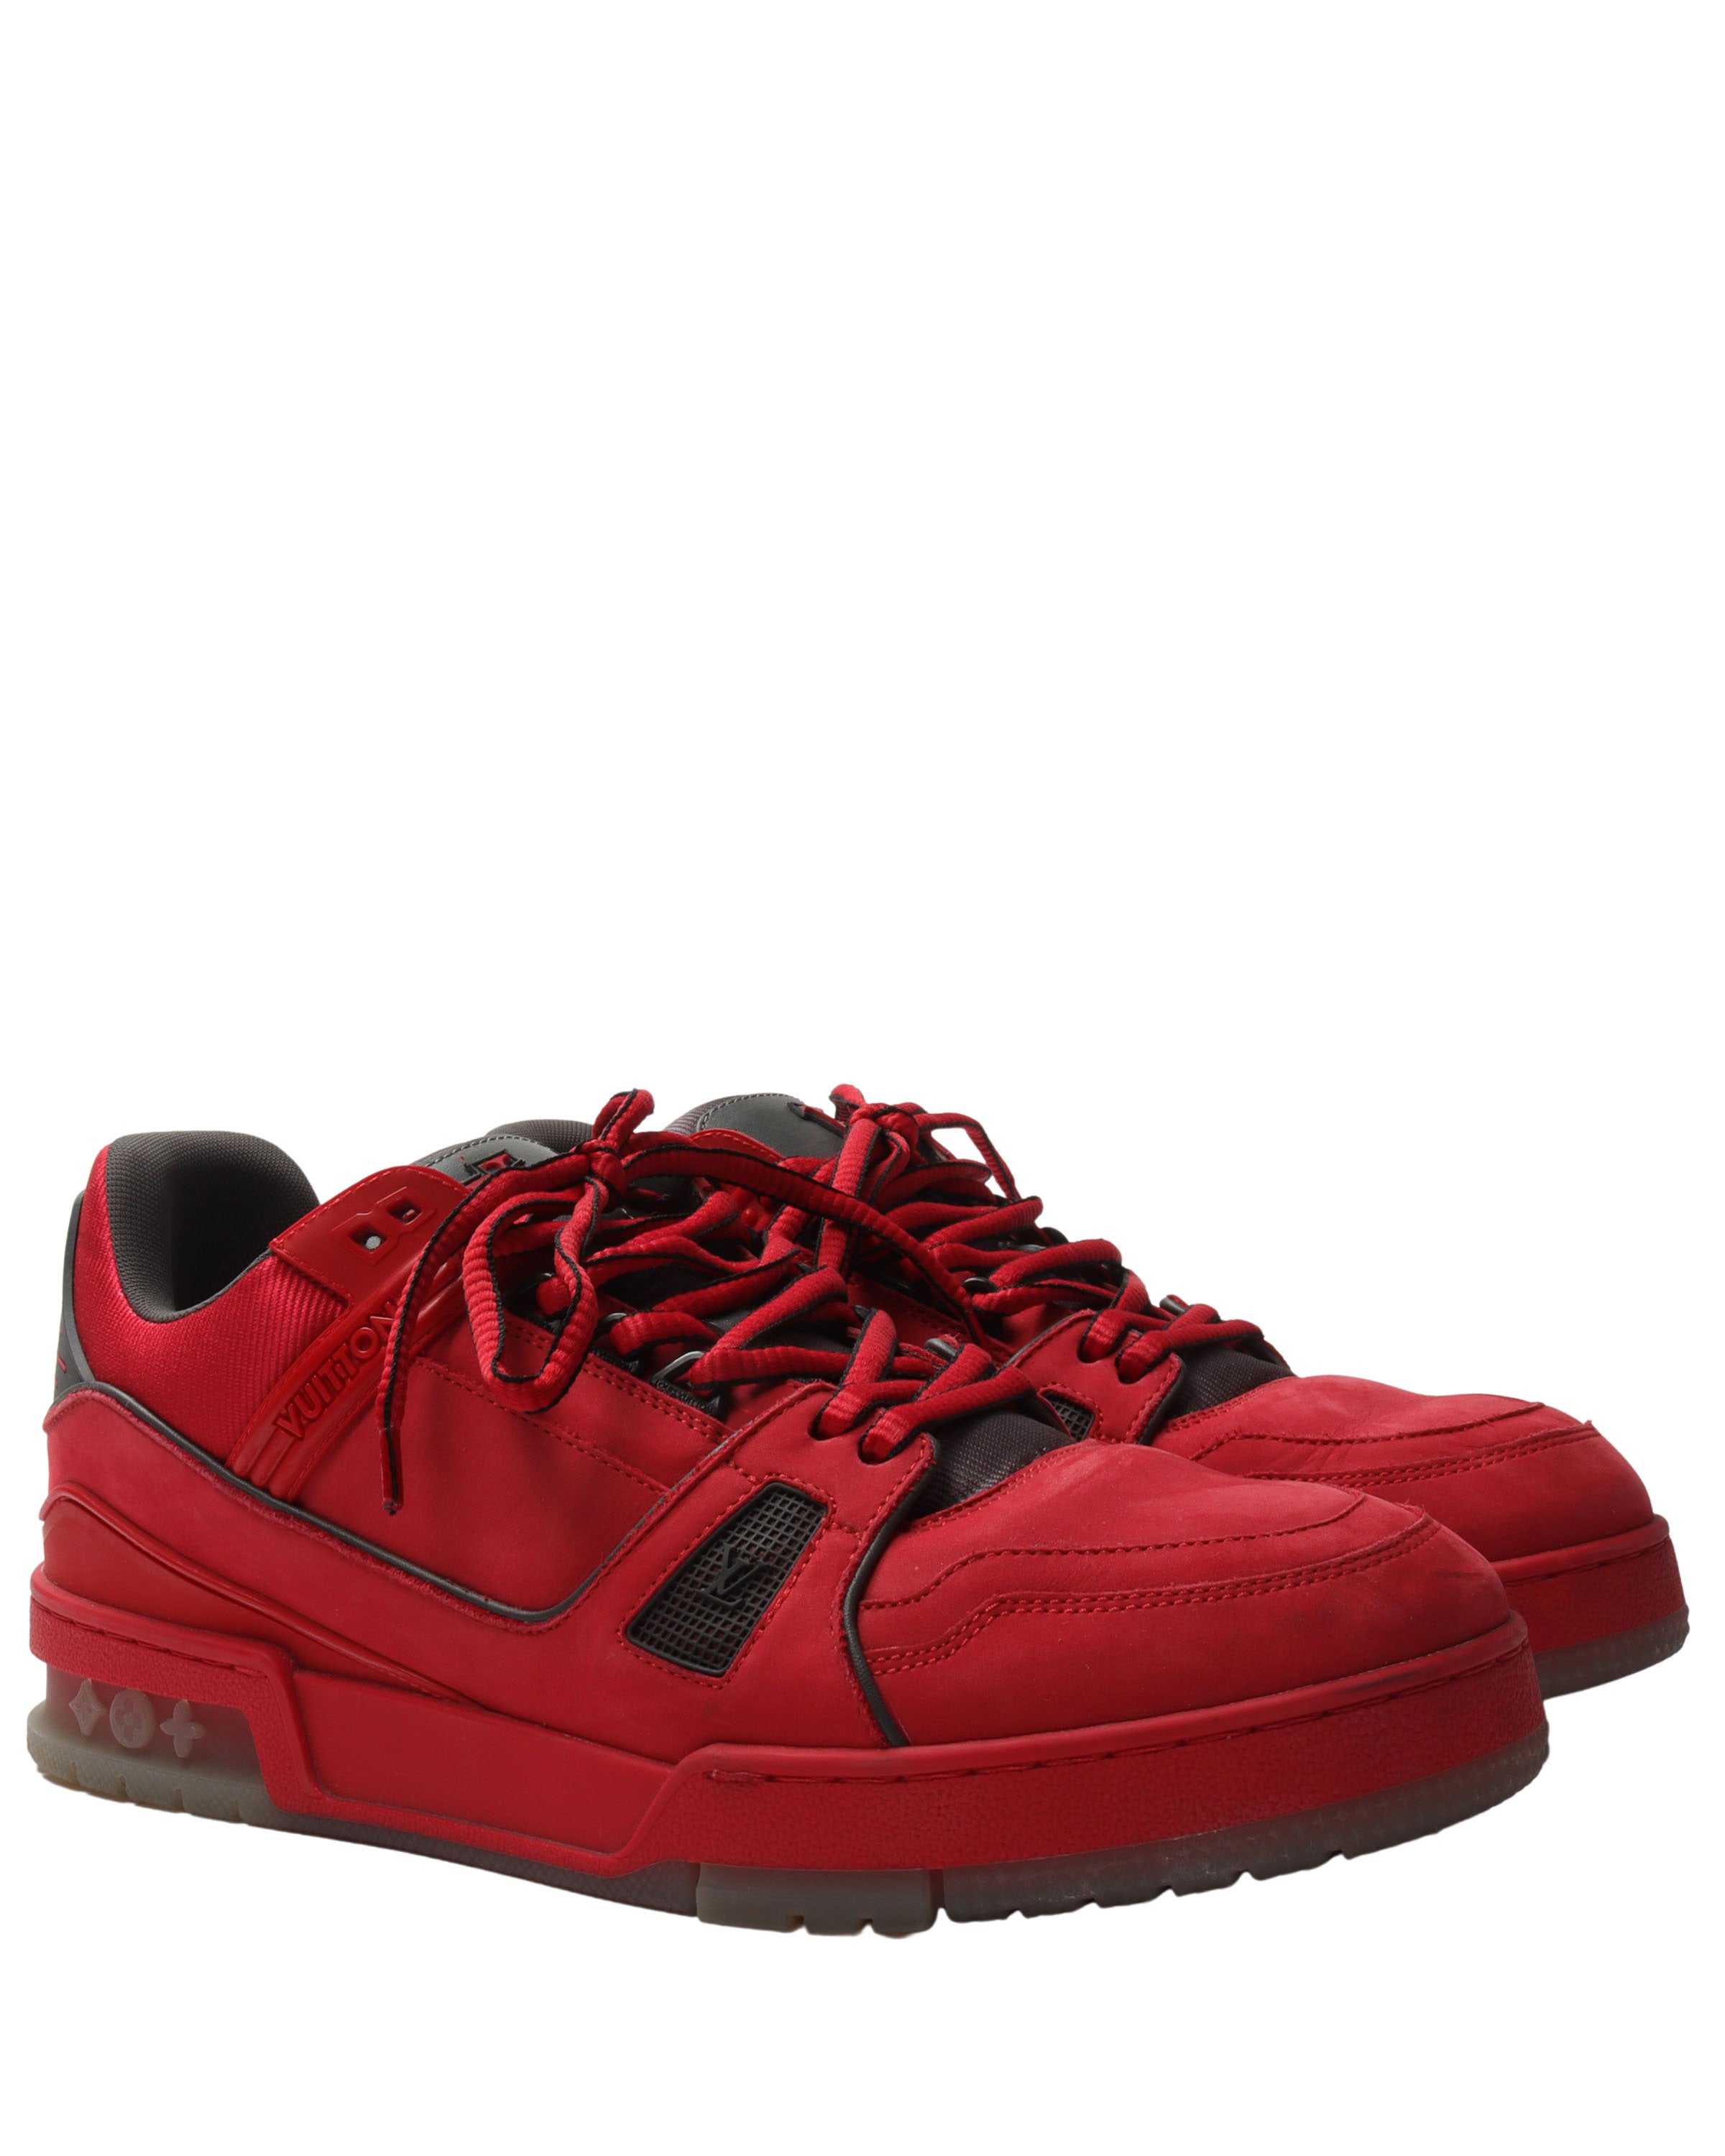 louis vuitton red trainers